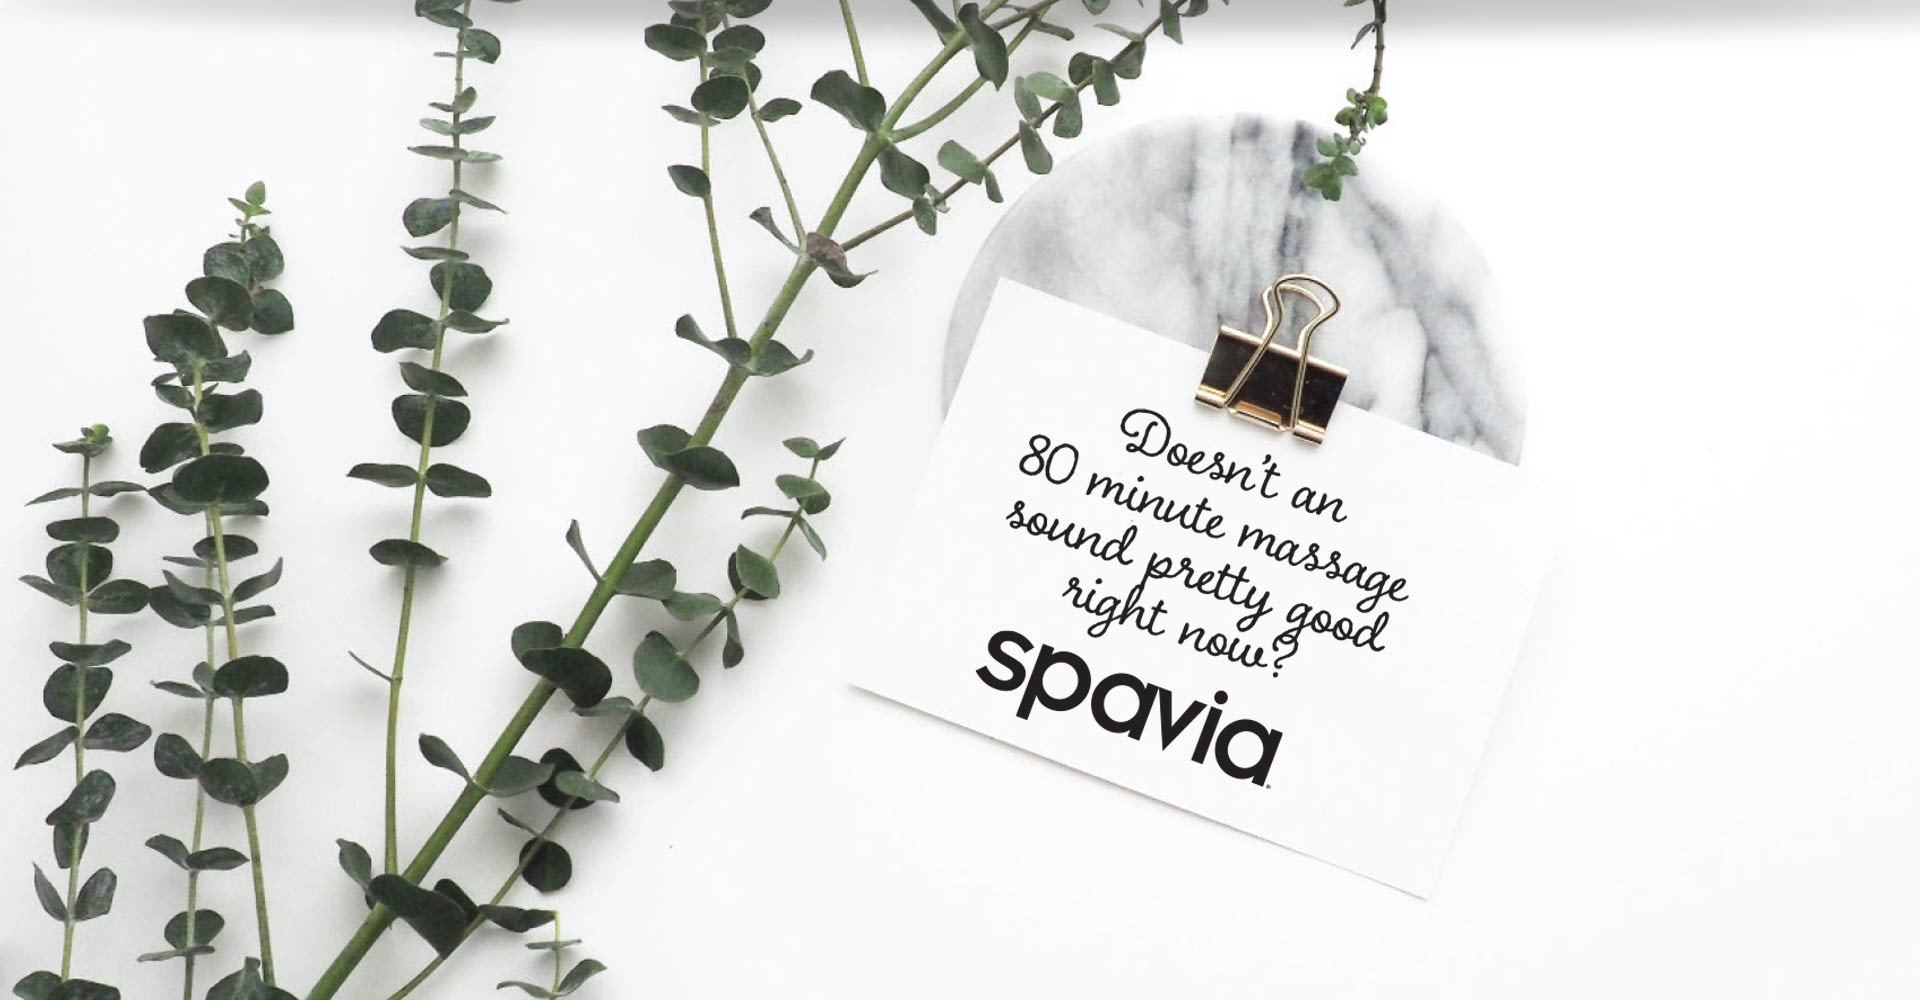 plant with a spavia massage promo note